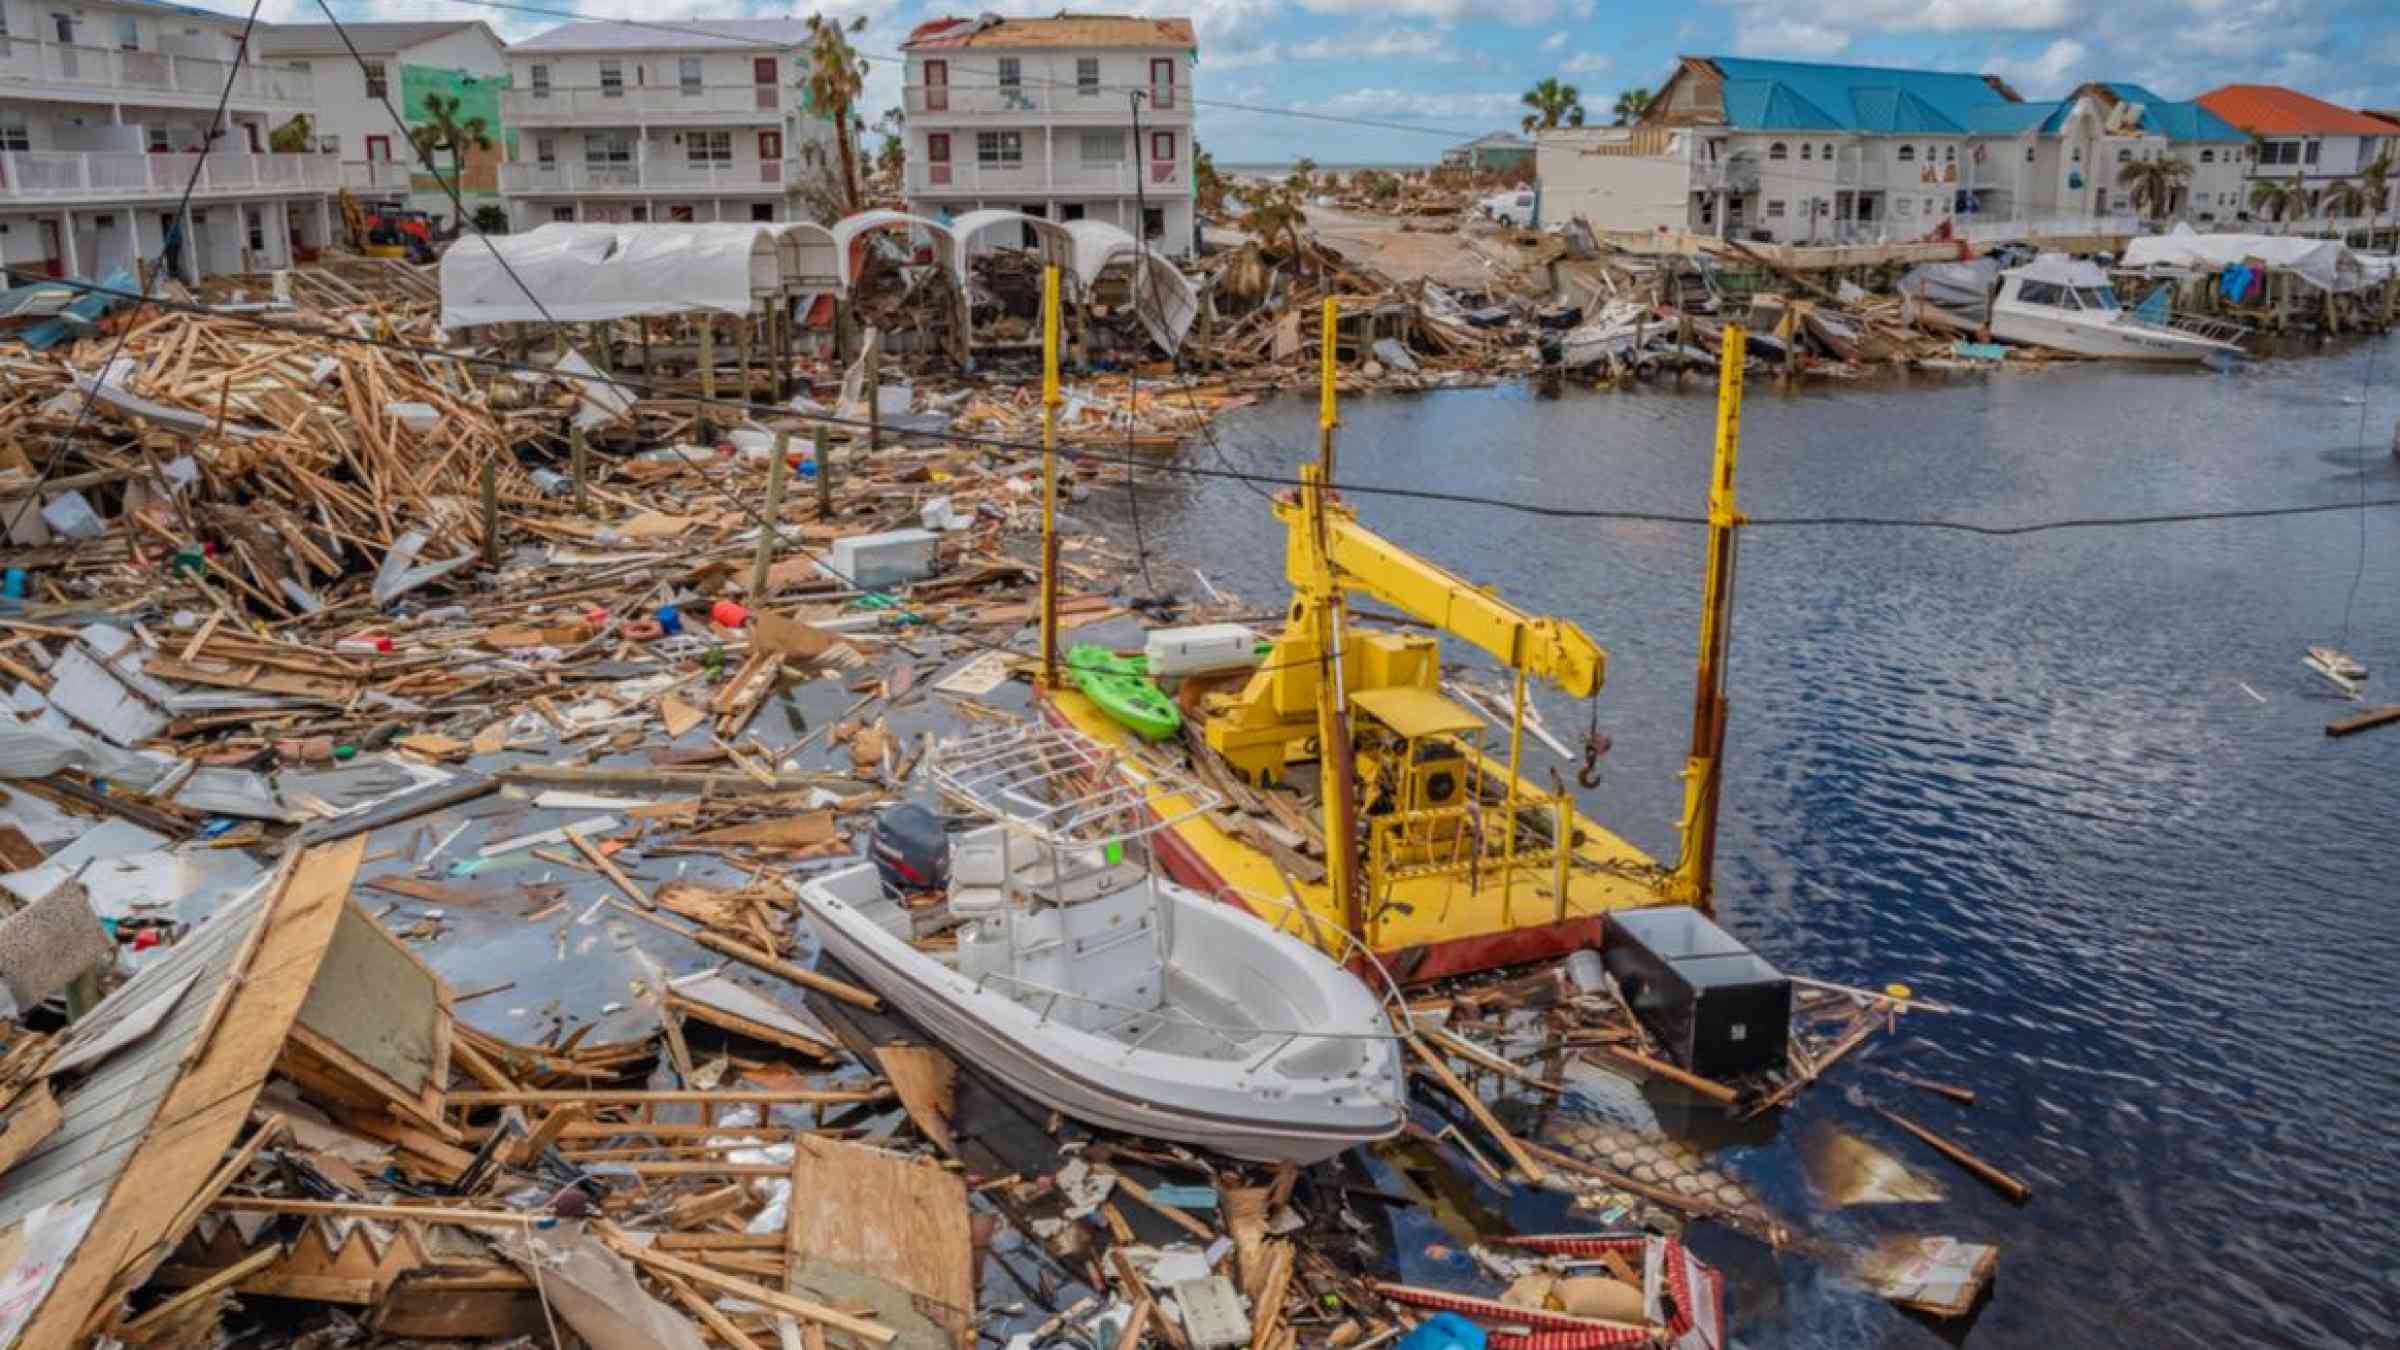 Aftermath of Hurricane Michael in Florida, USA (2018). Terry Kelly/Shutterstock